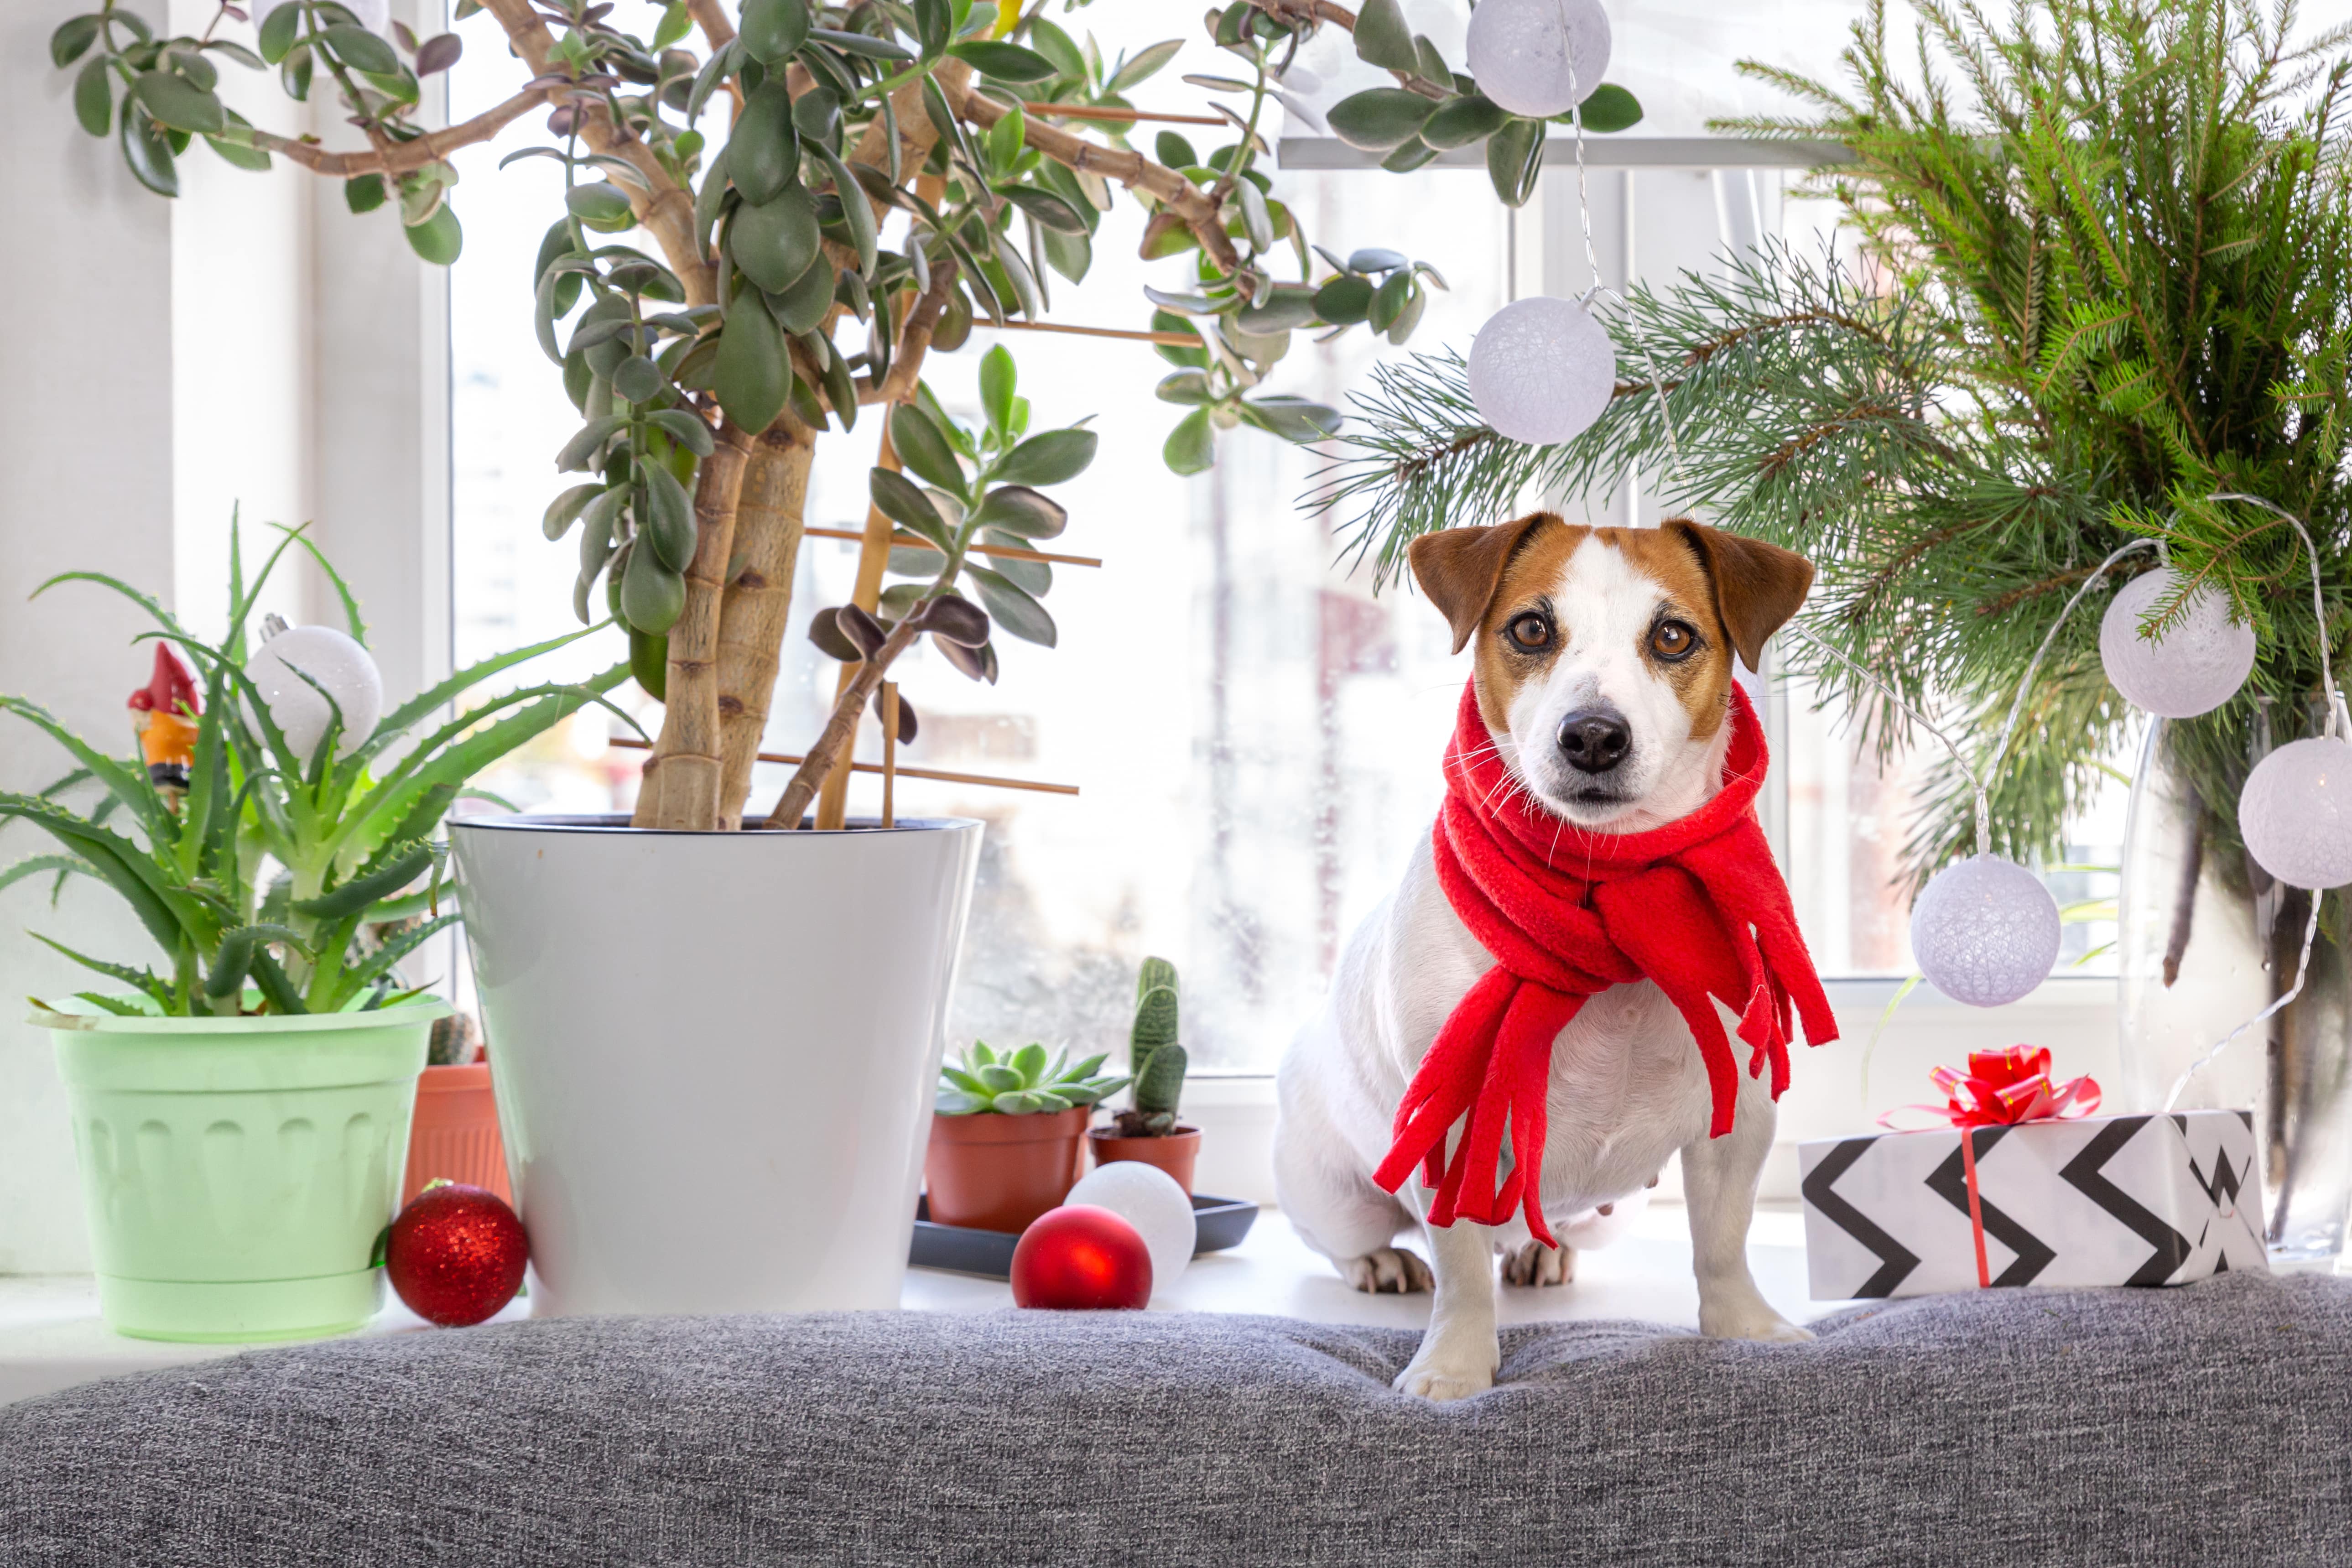 Potted plants sitting inside by a window next to a dog with a red scarf surrounded by ornaments